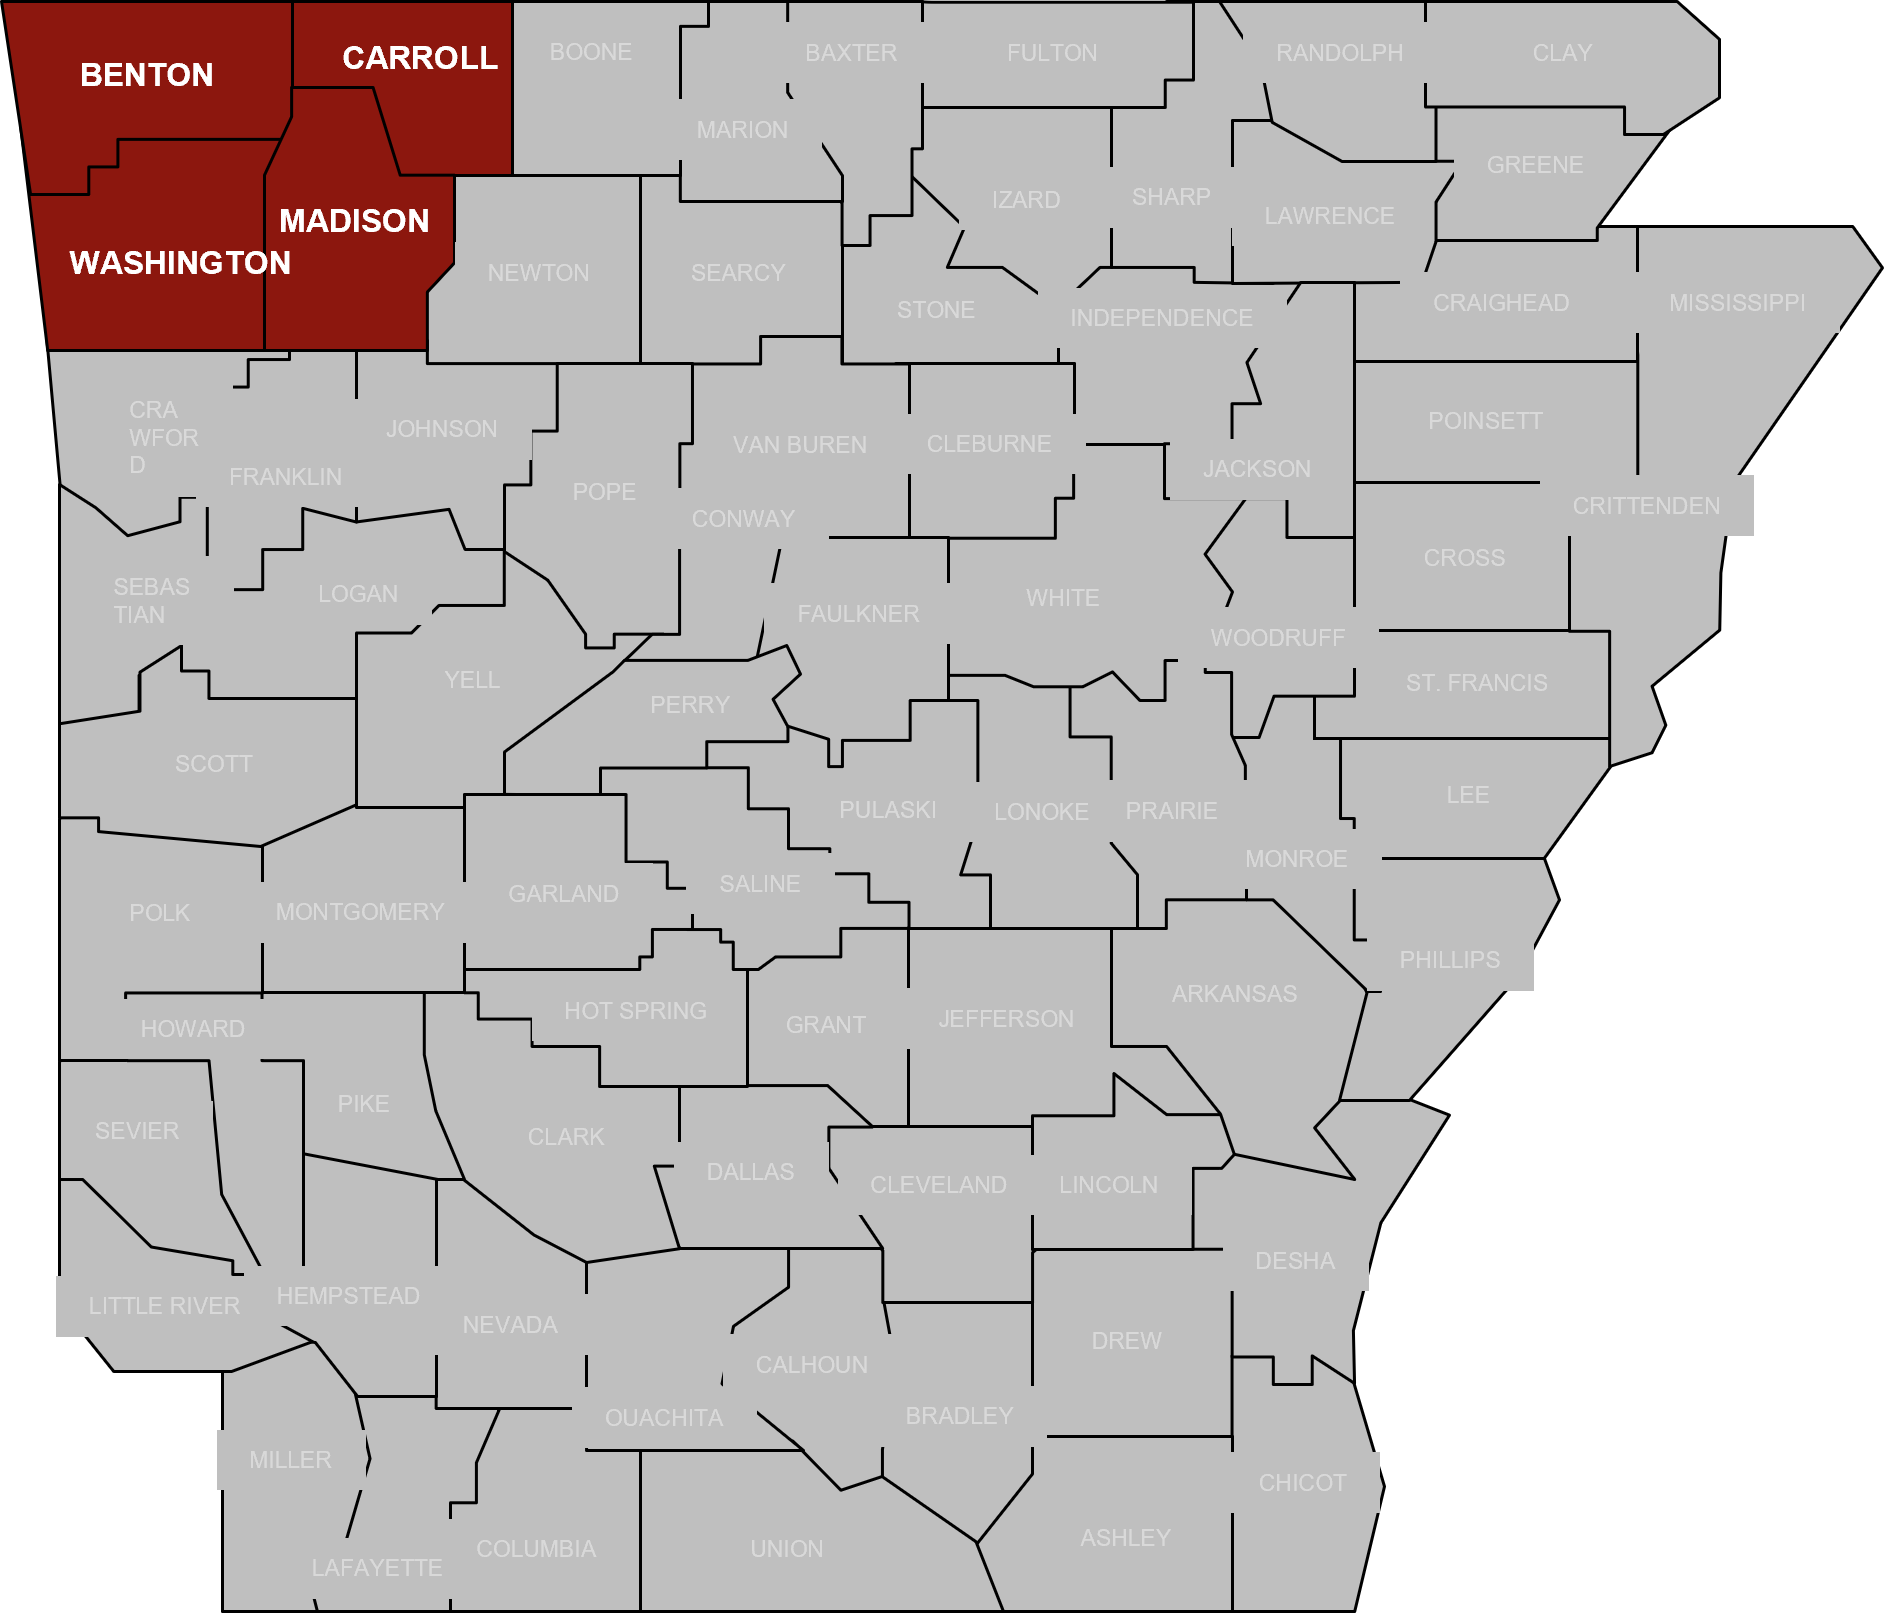 Map of Arkansas counties with Benton, Carroll, Madison, and Washington counties highlighted in red